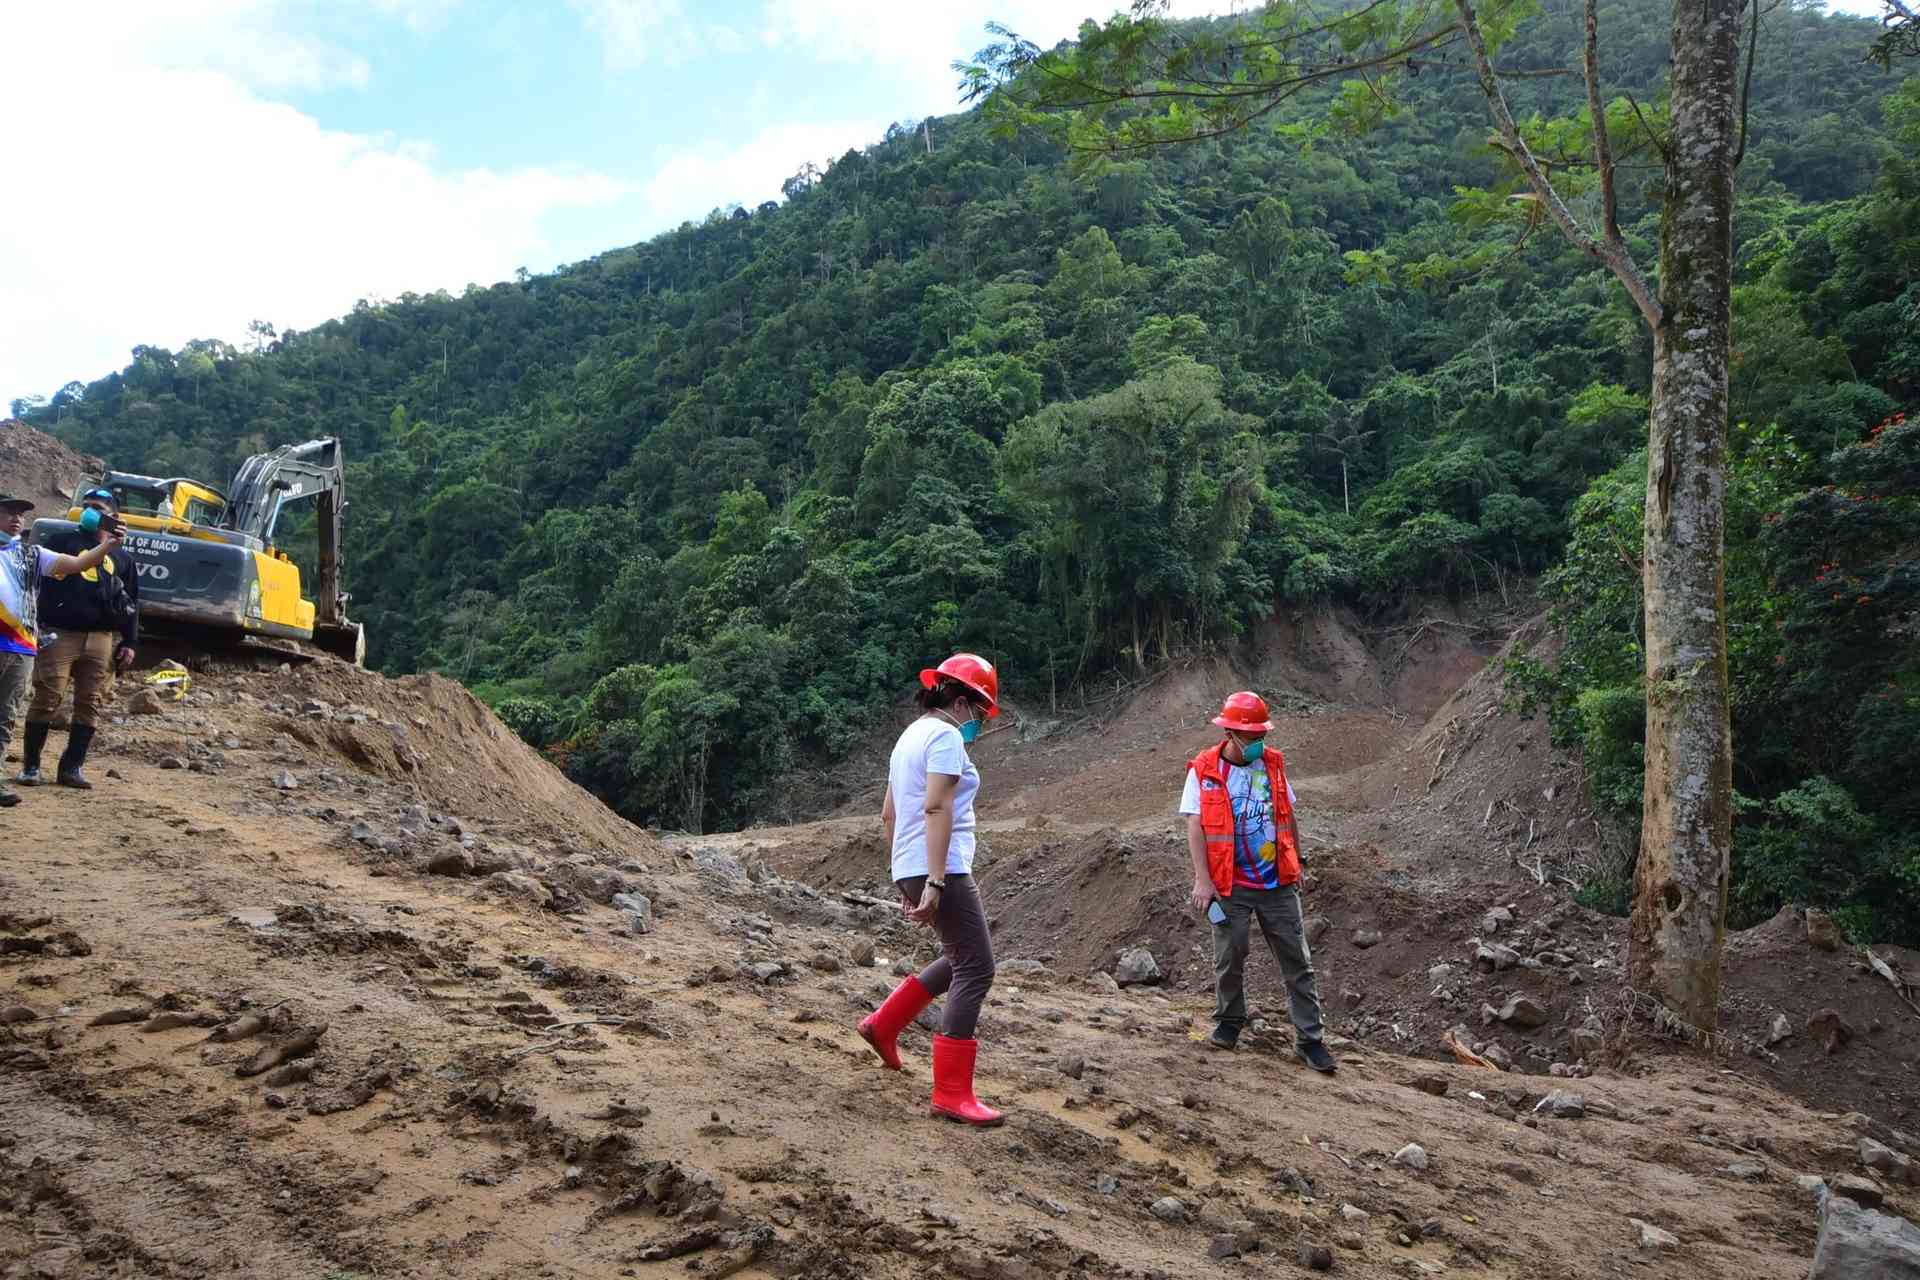 Deaths from Masara landslide rise to 54 - MDRRMO Maco